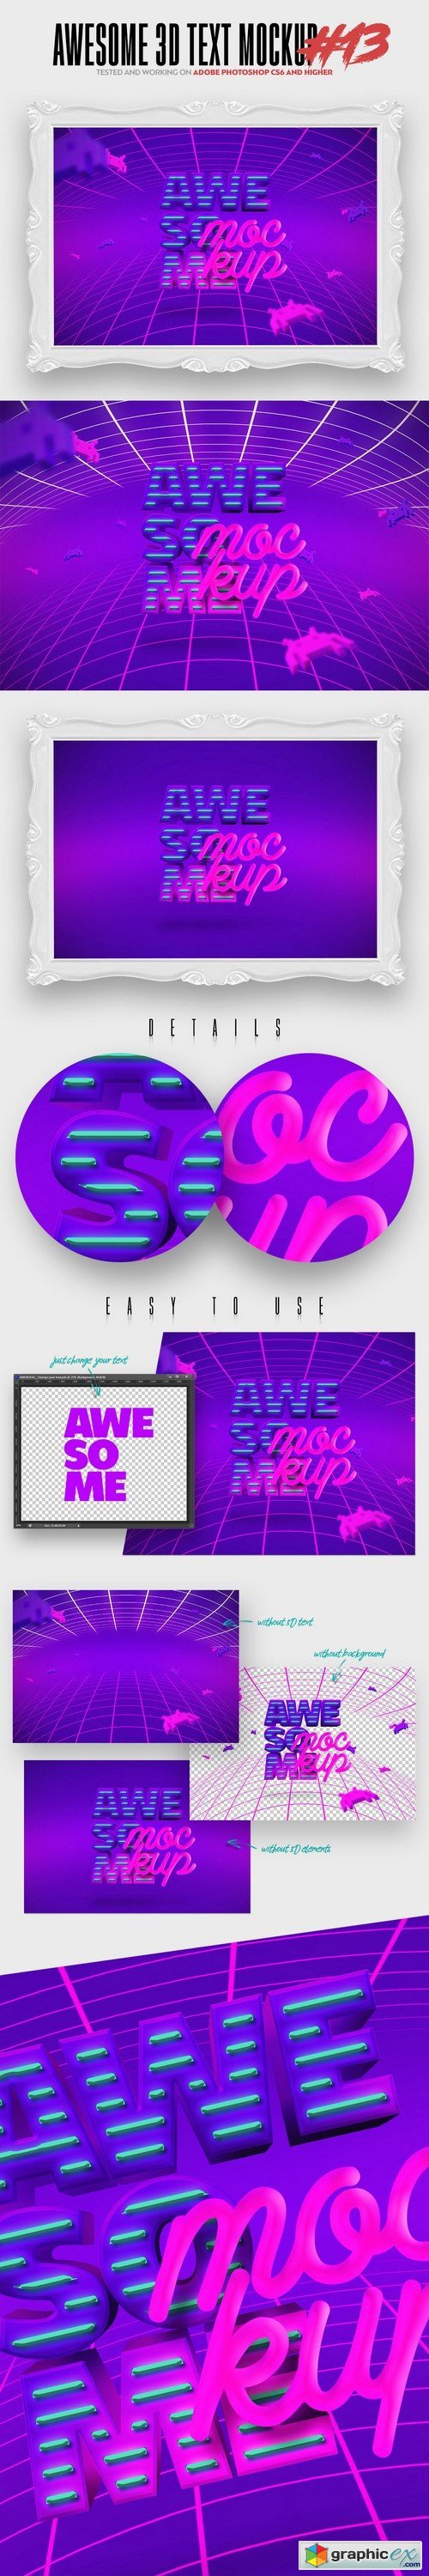 13 Awesome 3D Text Mockup - Ps CS6+ 000098